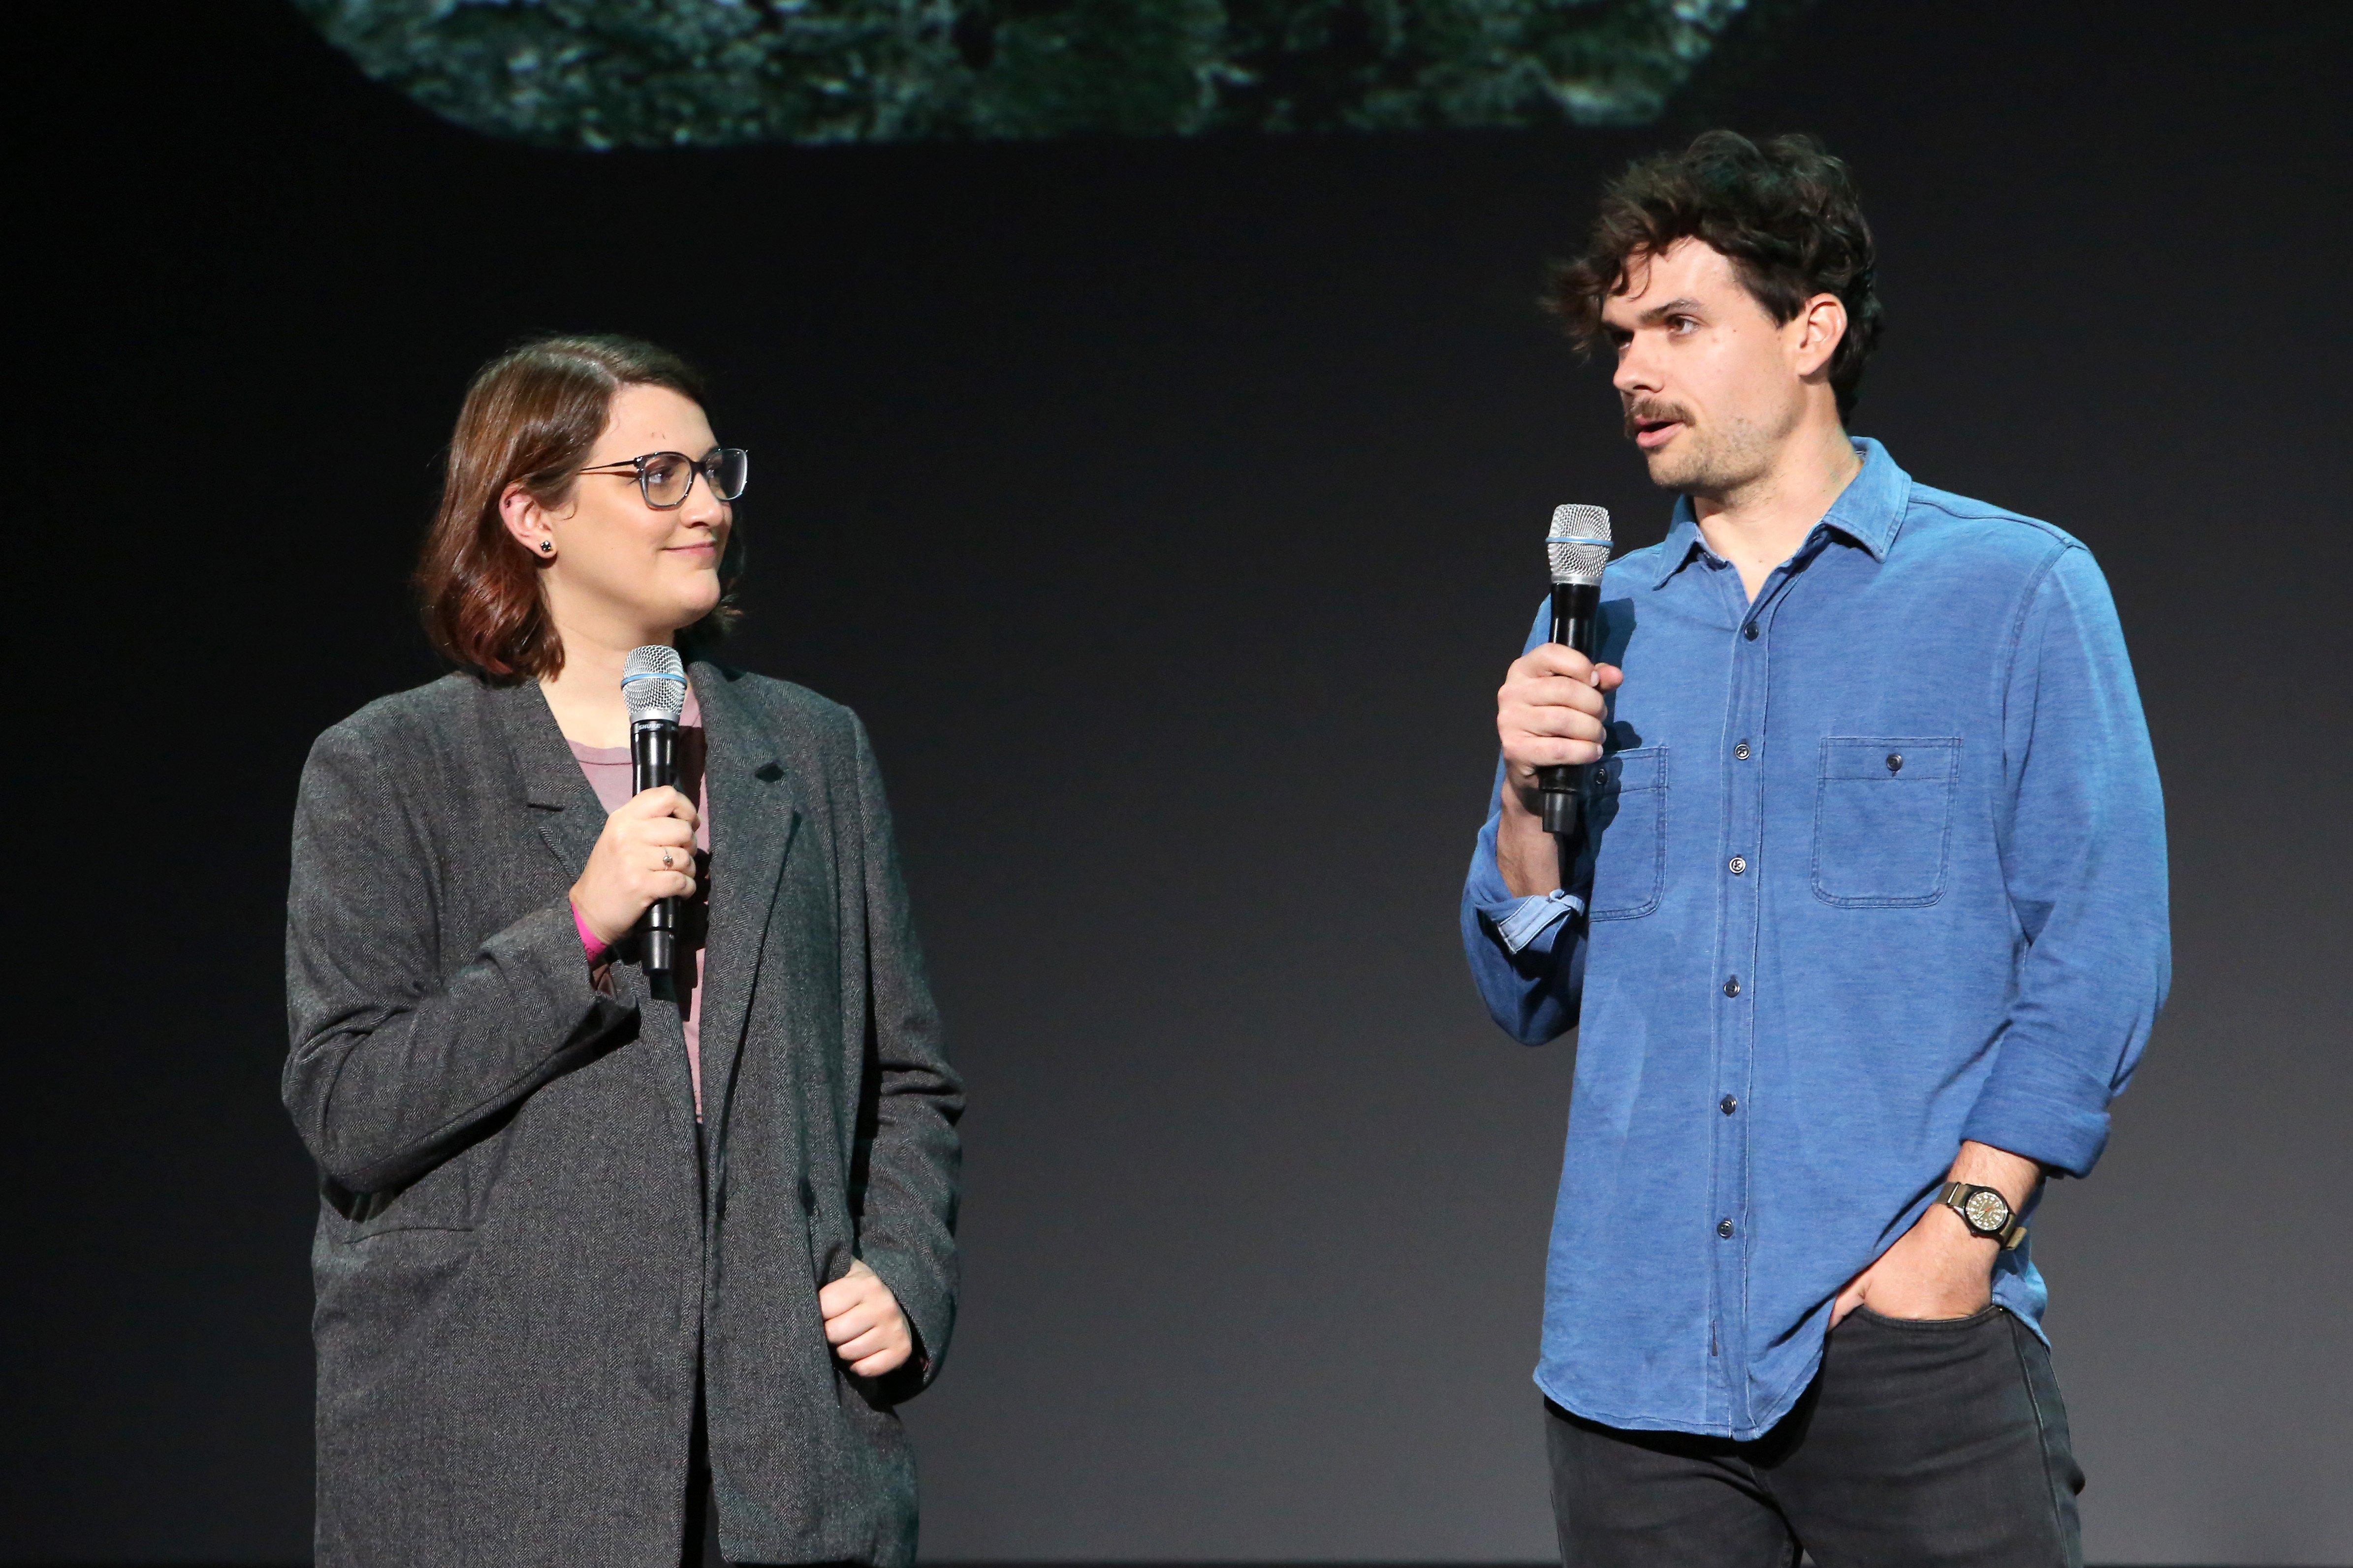 Director Kate Herron and Doctor Strange 2 writer Michael Waldron, who wrote the cameos in the Illuminati scene, discuss Loki at the 2019 D23 Expo